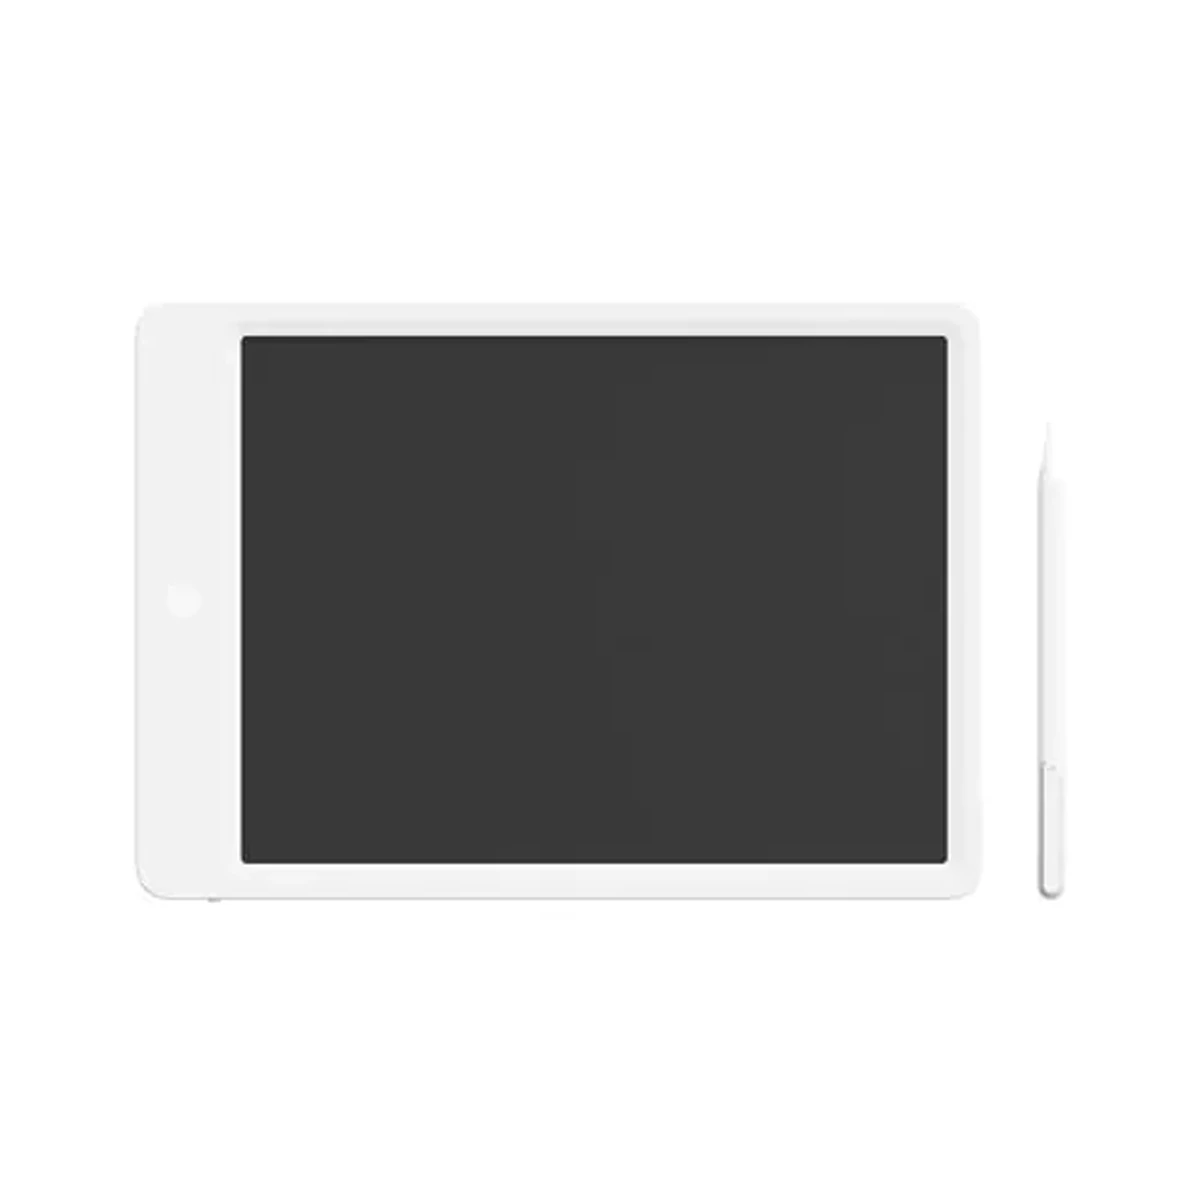 Find Xiaomi Mijia Writing Tablet 13 5 inch Small LCD Blackboard Ultra Thin Digital Drawing Board Electronic Handwriting Notepad with Pen for Sale on Gipsybee.com